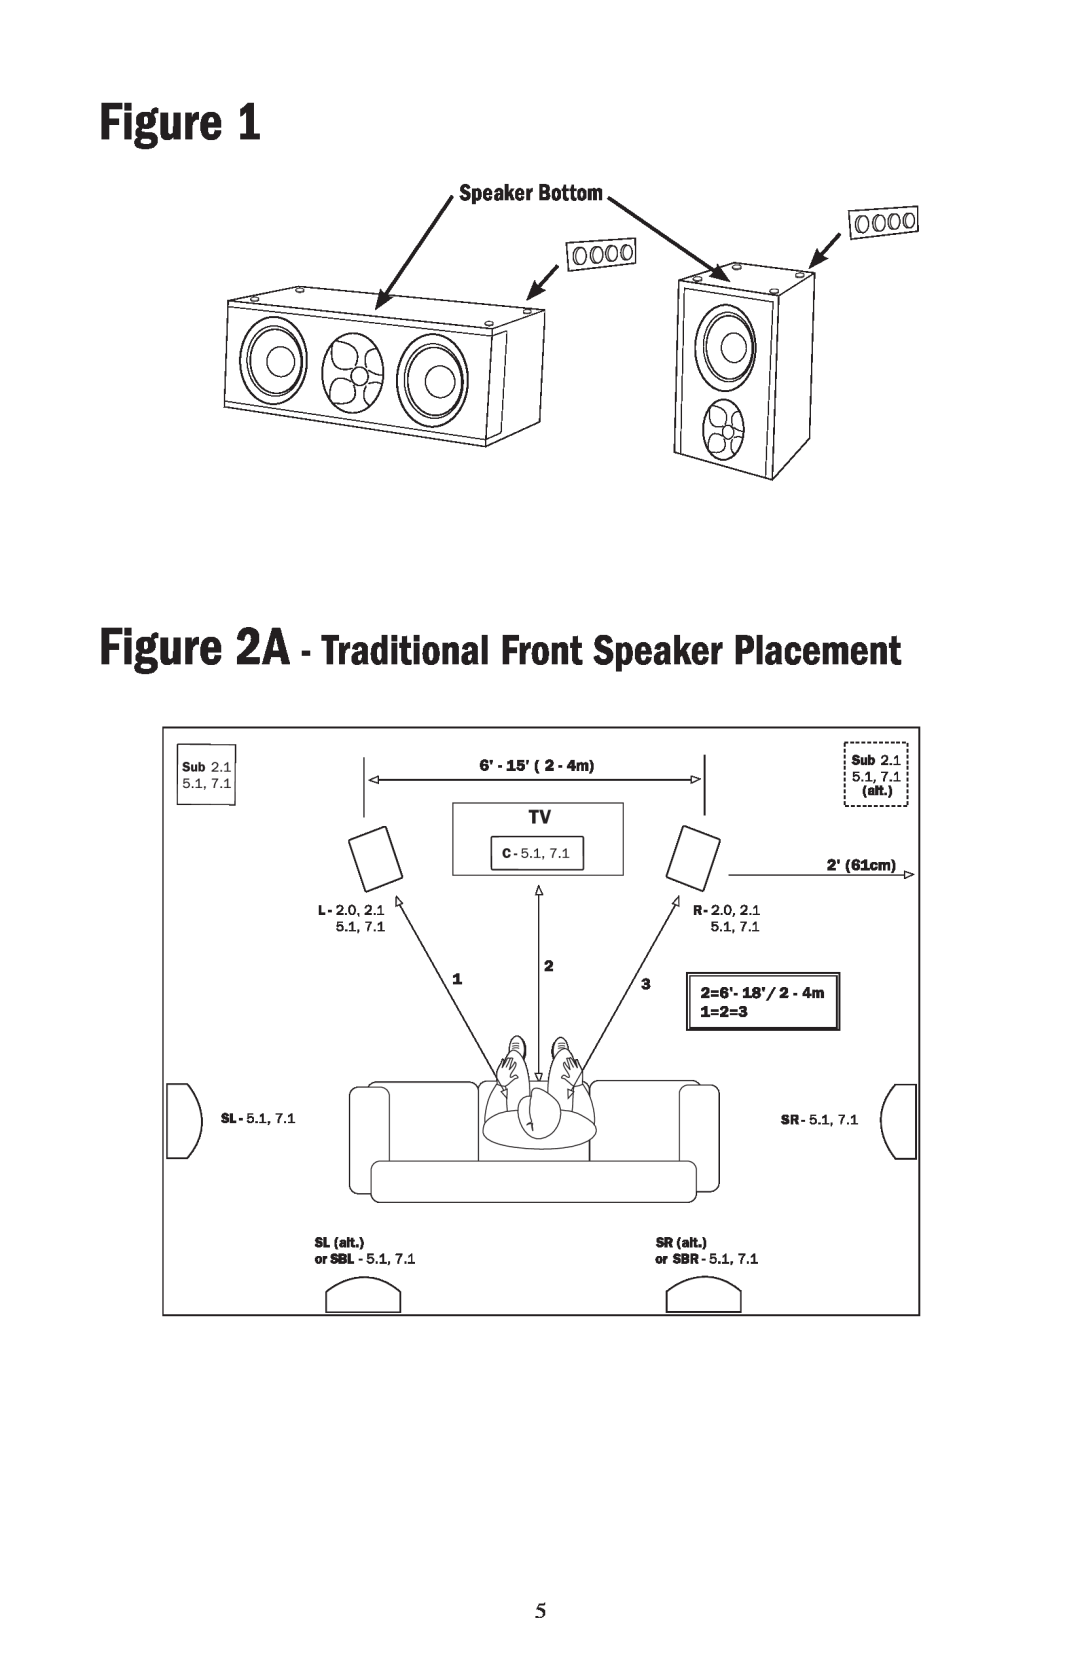 Klipsch WC-24, WF-34, WB-14, WF-35 owner manual A - Traditional Front Speaker Placement, Speaker Bottom 